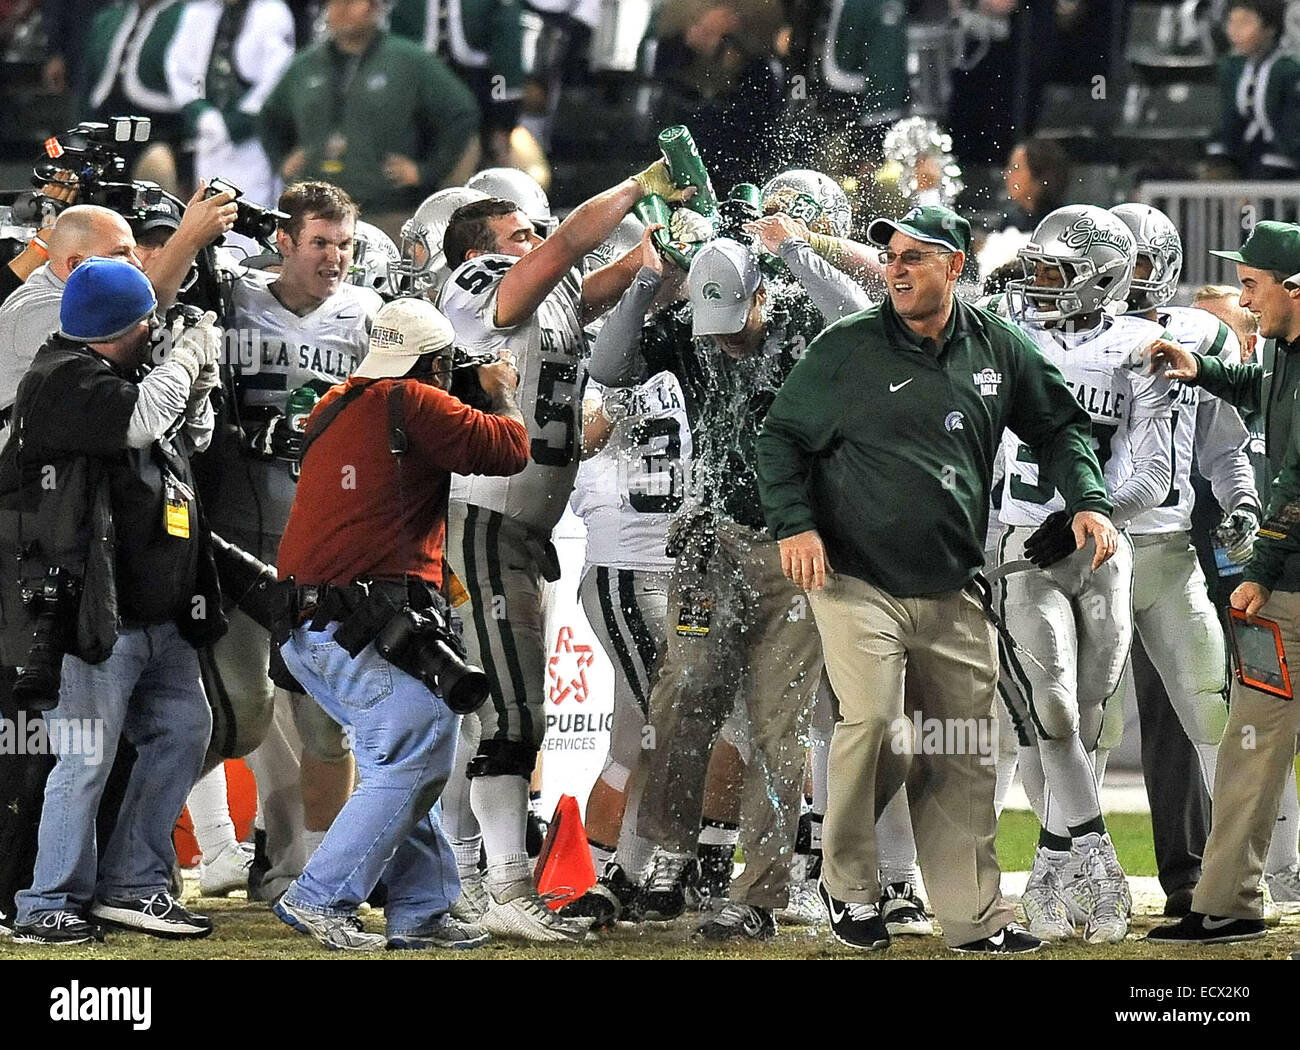 Carson, CA. 20th Dec, 2014. Concord De La Salle head coach Justin Alumbaugh is doused with water by his players as they celebrate on the sidelines in the closing seconds of the game as they win the CIF Open Division California State Football Championship game between Concord De La Salle and the Centennial Huskies at the Stub Hub Center in Carson, California.Concord De La Salle defeats the Centennial Huskies 63-42.Louis Lopez/CSM/Alamy Live News Stock Photo